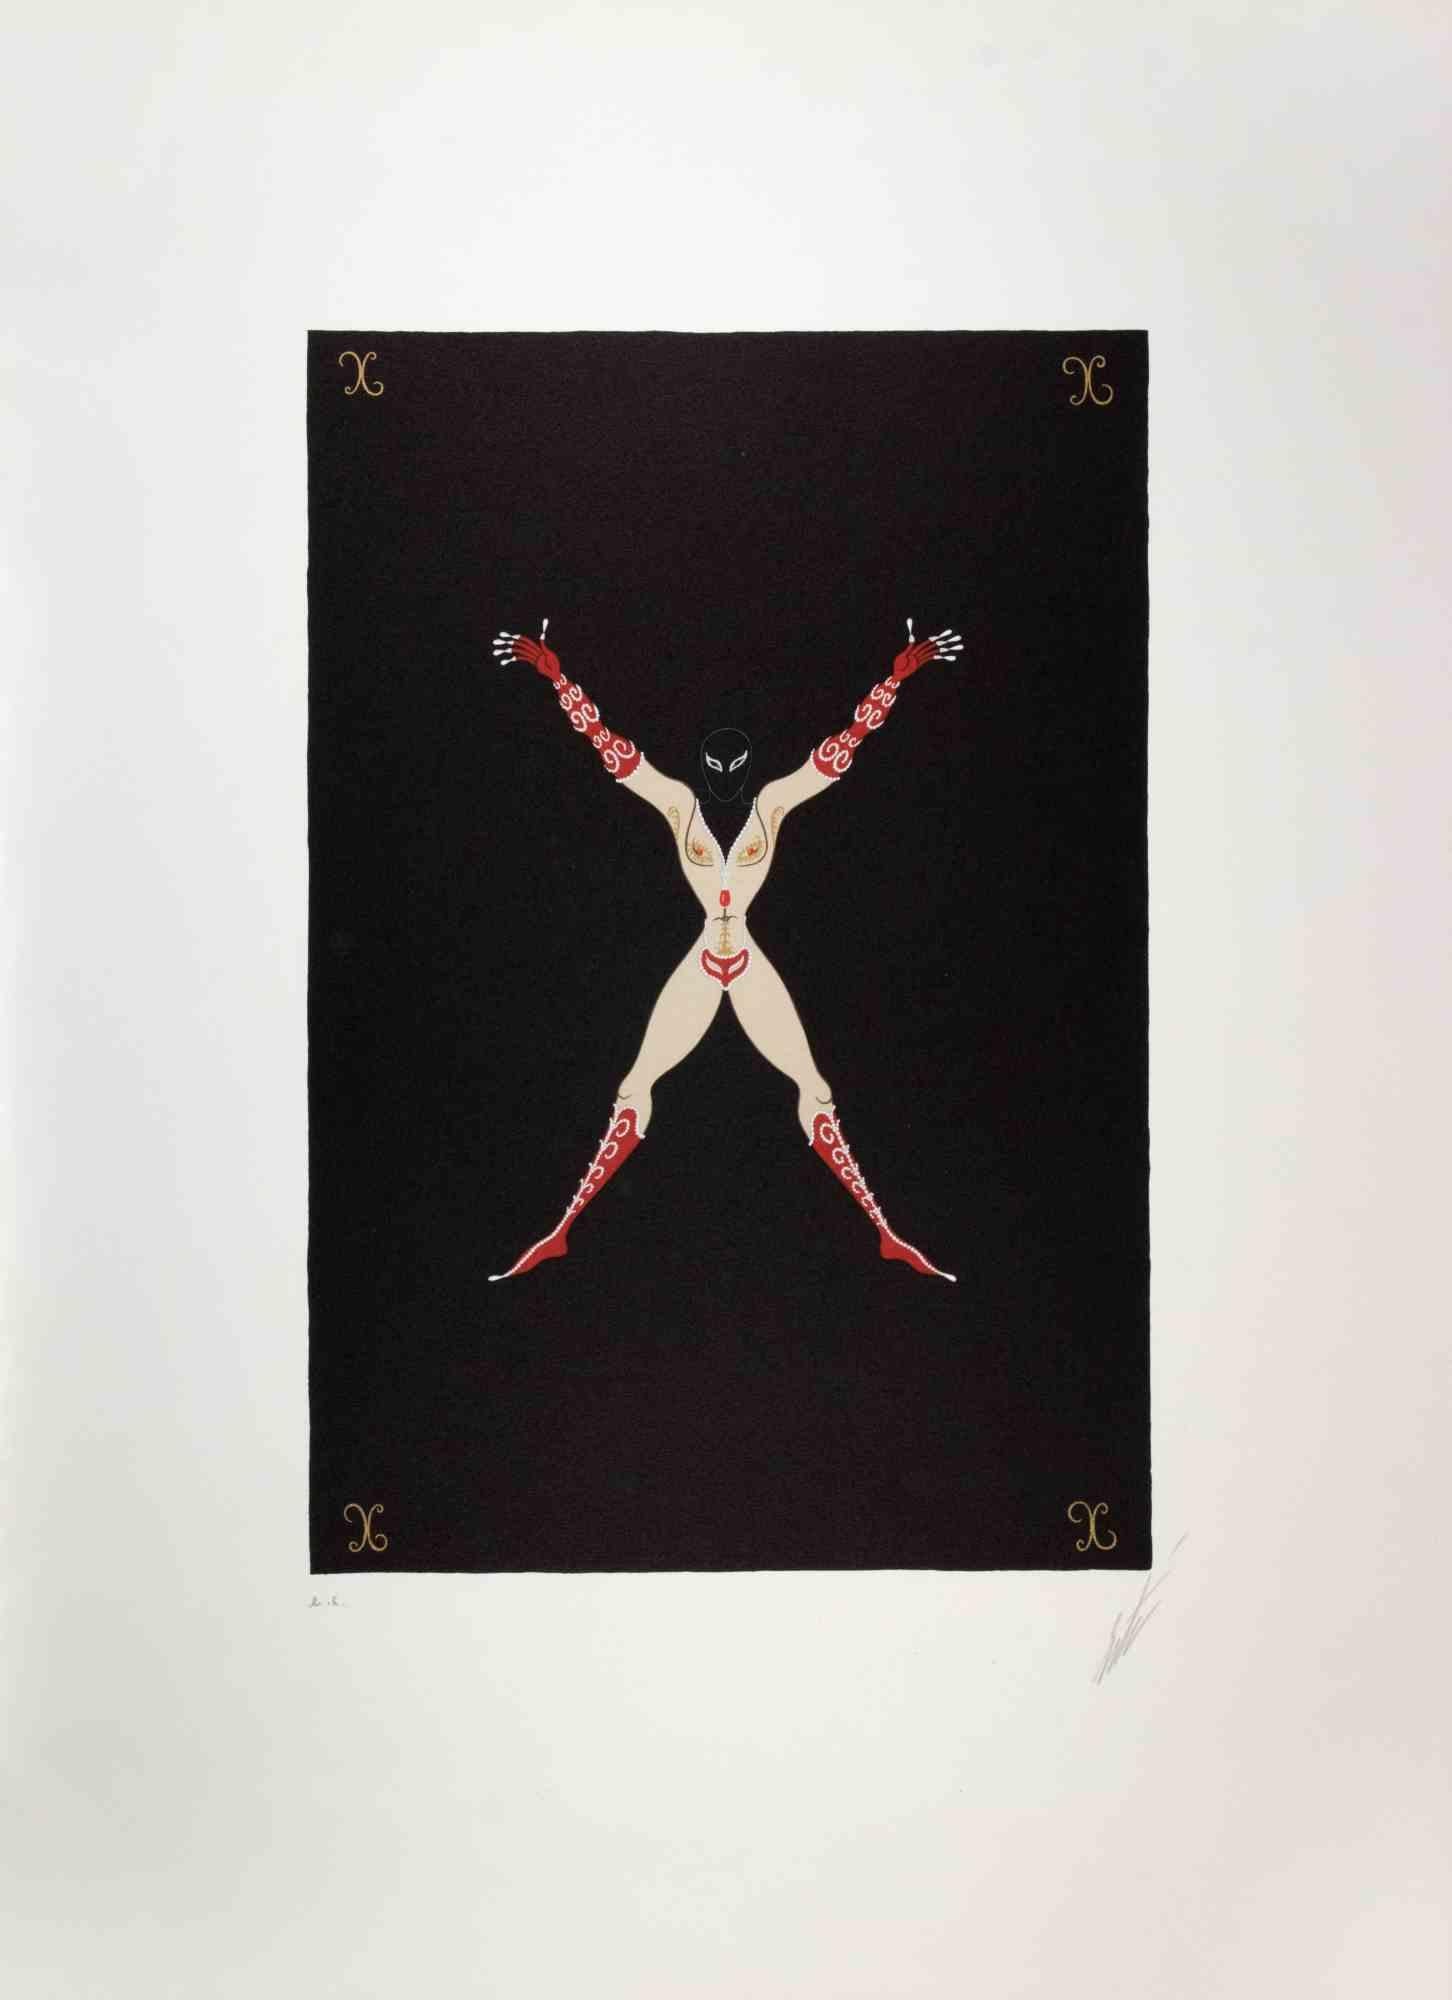 Letter X - from the suite Letters of the Alphabet is a contemporary artwork realized by Erté (Romain de Tirtoff).

Lithograph and Screen Print.

The artwork is from the suite "Letters of the Alphabet", 1976.

Hand signed on the lower margin. Artist